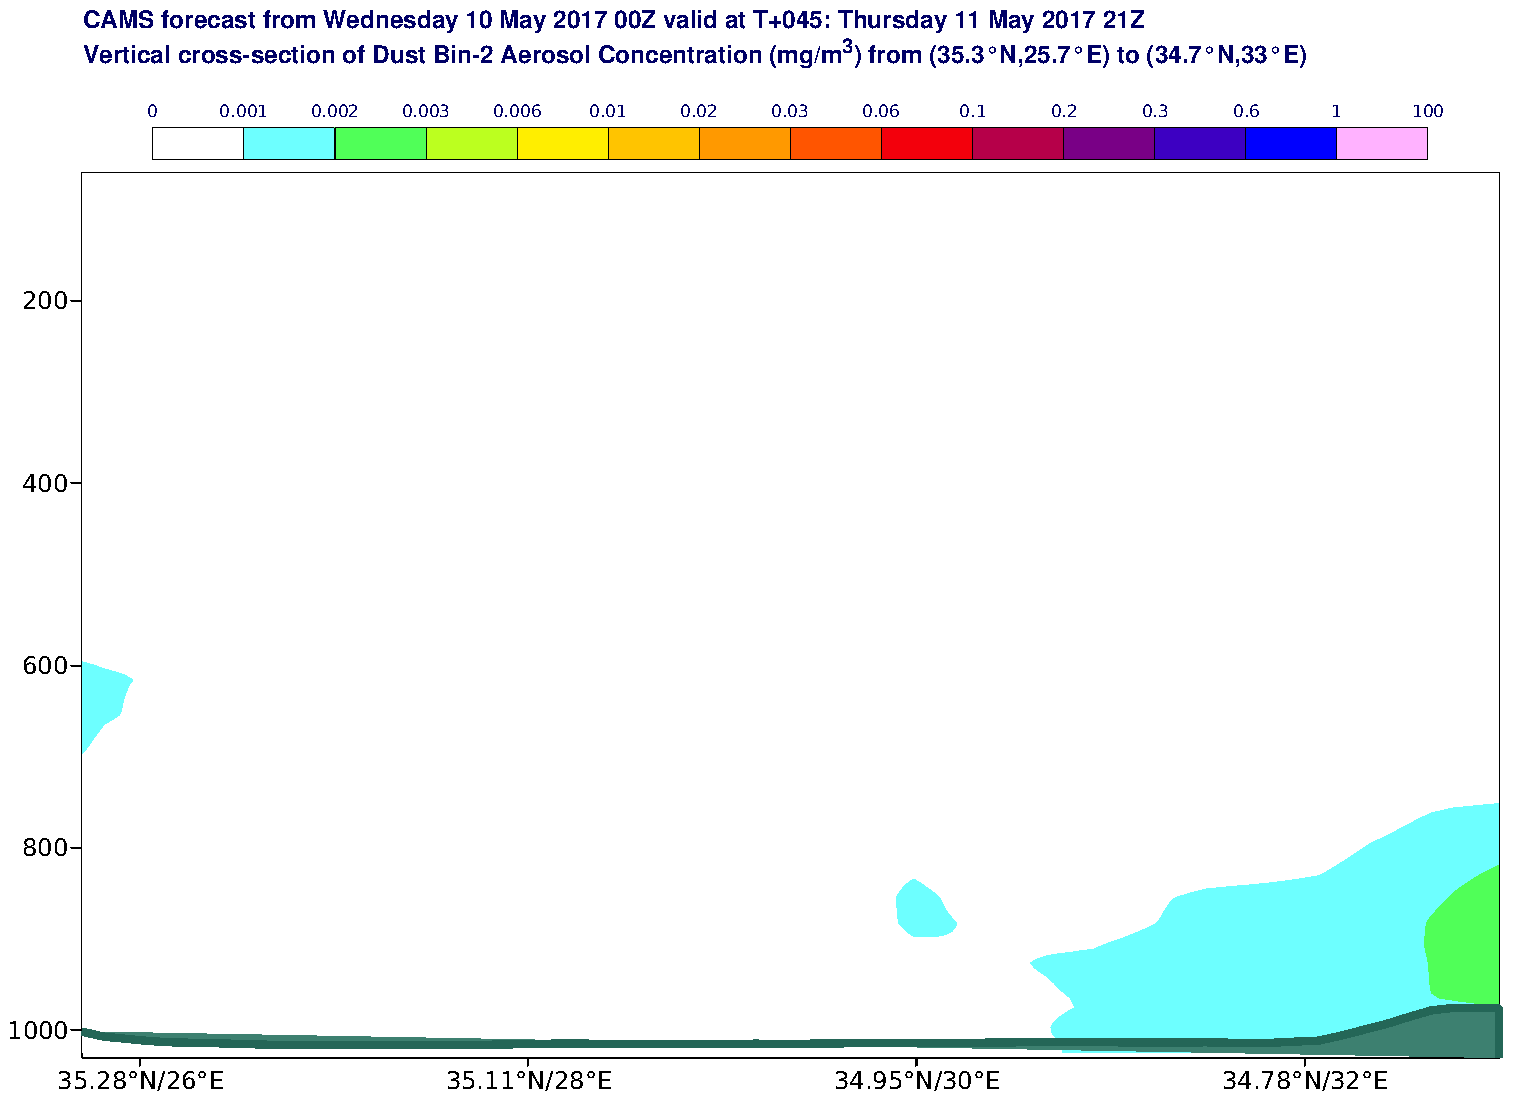 Vertical cross-section of Dust Bin-2 Aerosol Concentration (mg/m3) valid at T45 - 2017-05-11 21:00